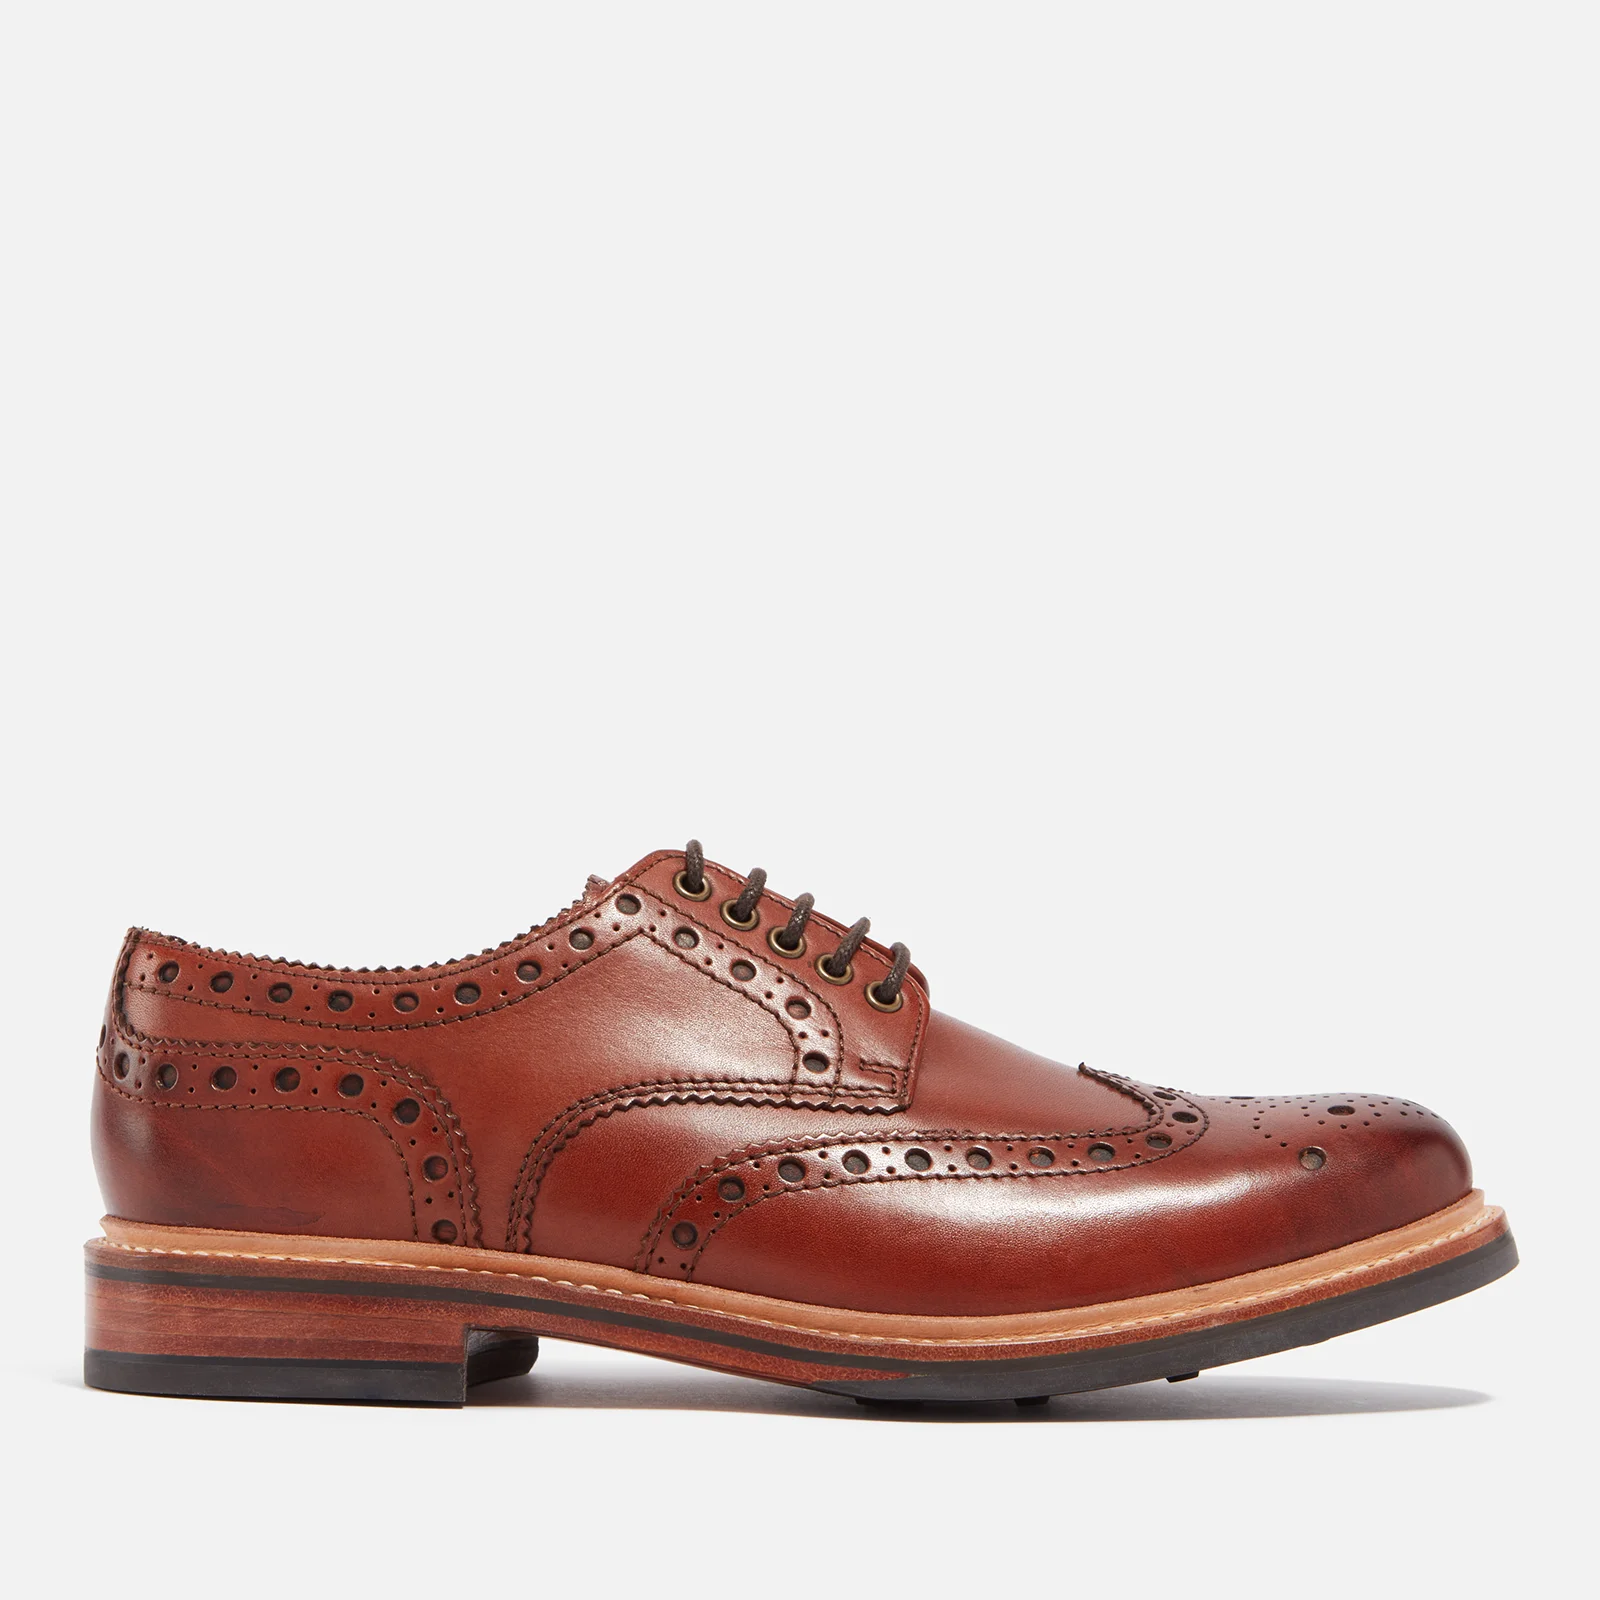 Grenson Men's Archie Handpainted Leather Brogues - Tan Image 1